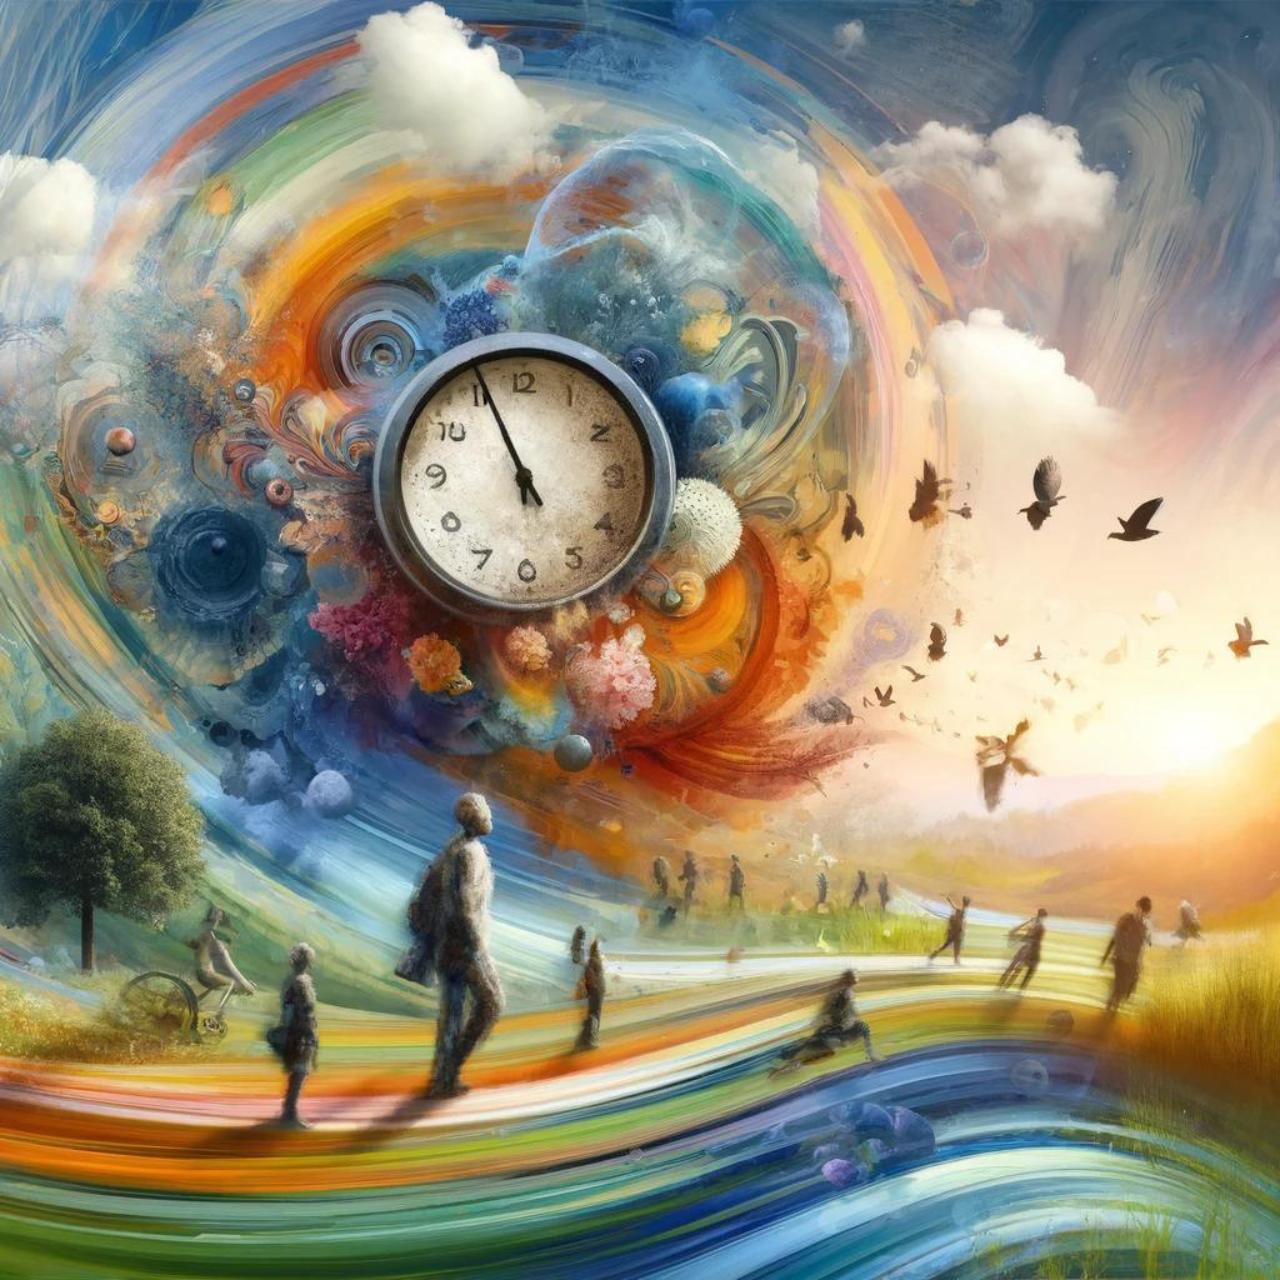 AI generated image of a vivid and imaginative scene that explores the interplay of time and presence, using abstract or symbolic elements to reflect on cherishing the now and living in the moment. There are bright colors and a clock floating while people are engaged with their surroundings.